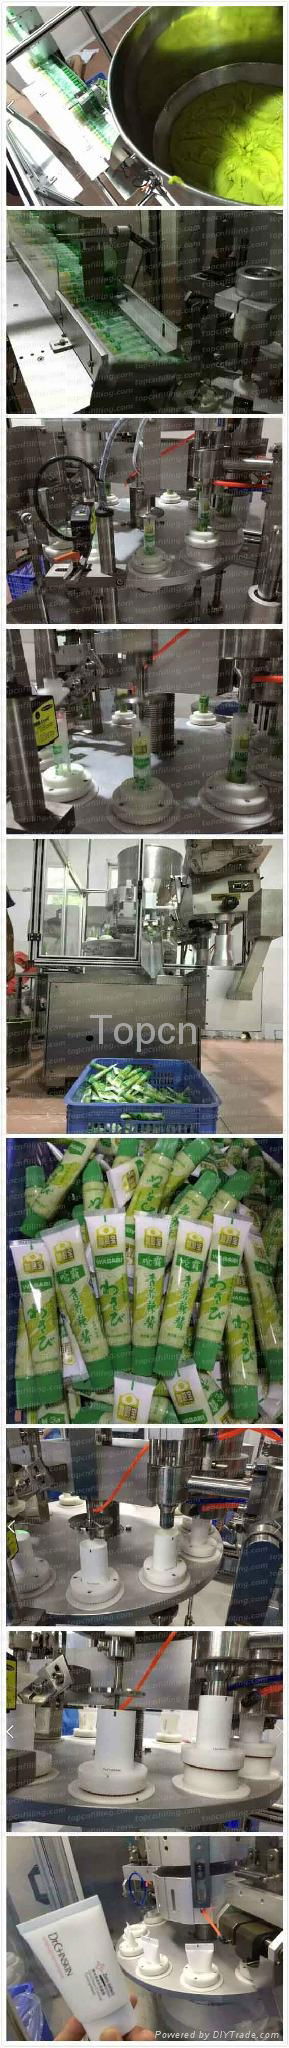 Toothpast tube filling and sealing machine 3